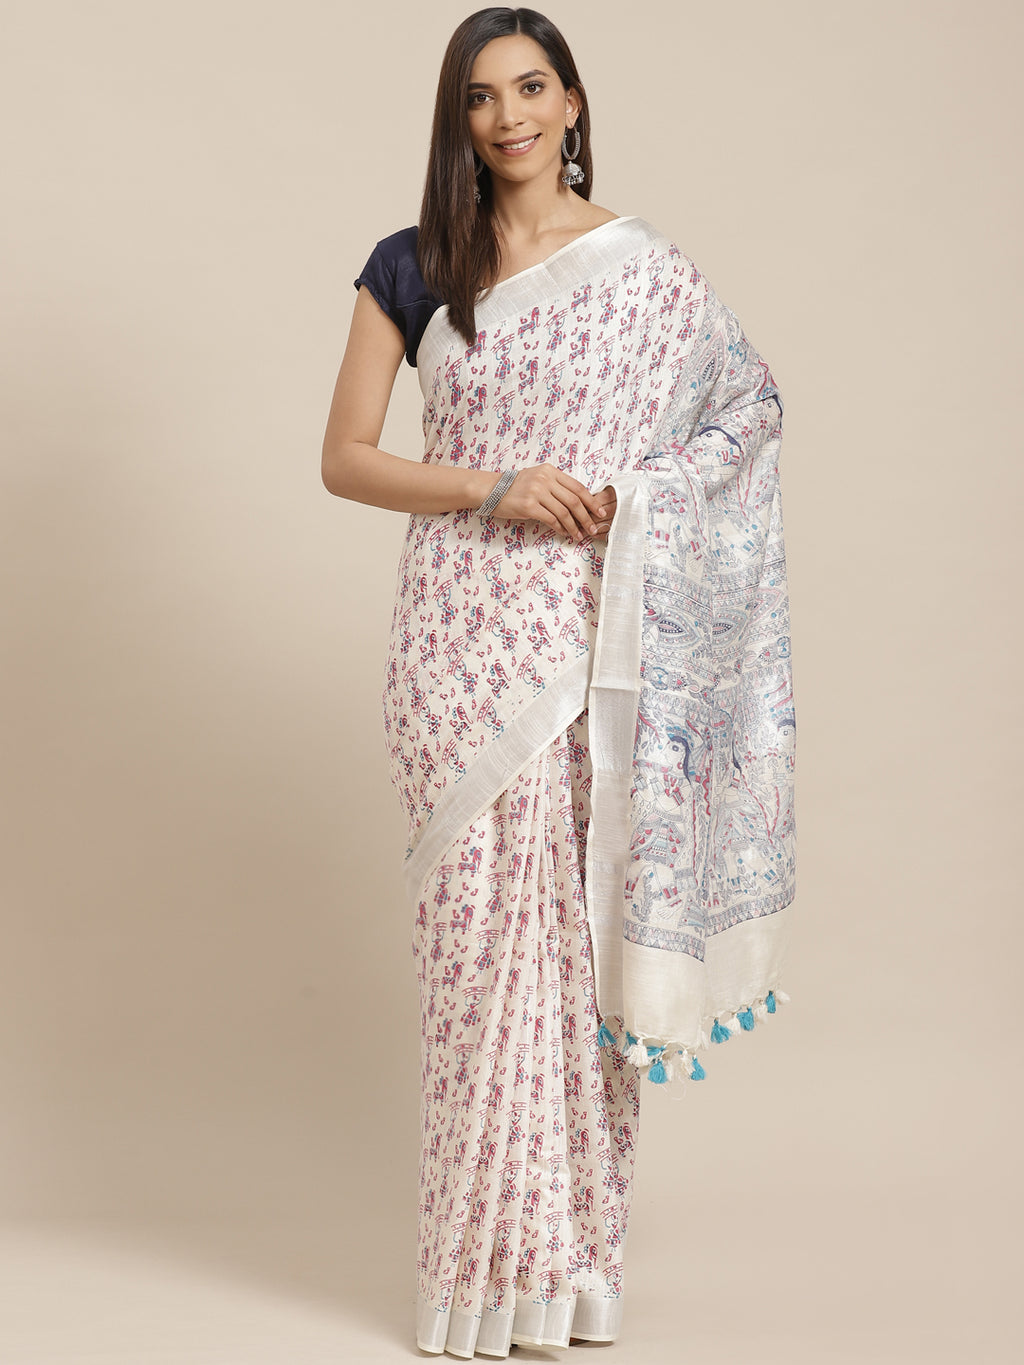 Off White and Black, Kalakari India Linen Handwoven Saree and Blouse ALBGSA0089-Saree-Kalakari India-ALBGSA0089-Cotton, Geographical Indication, Hand Crafted, Heritage Prints, Linen, Natural Dyes, Red, Sarees, Shibori, Sustainable Fabrics, Woven, Yellow-[Linen,Ethnic,wear,Fashionista,Handloom,Handicraft,Indigo,blockprint,block,print,Cotton,Chanderi,Blue, latest,classy,party,bollywood,trendy,summer,style,traditional,formal,elegant,unique,style,hand,block,print, dabu,booti,gift,present,glamorous,a